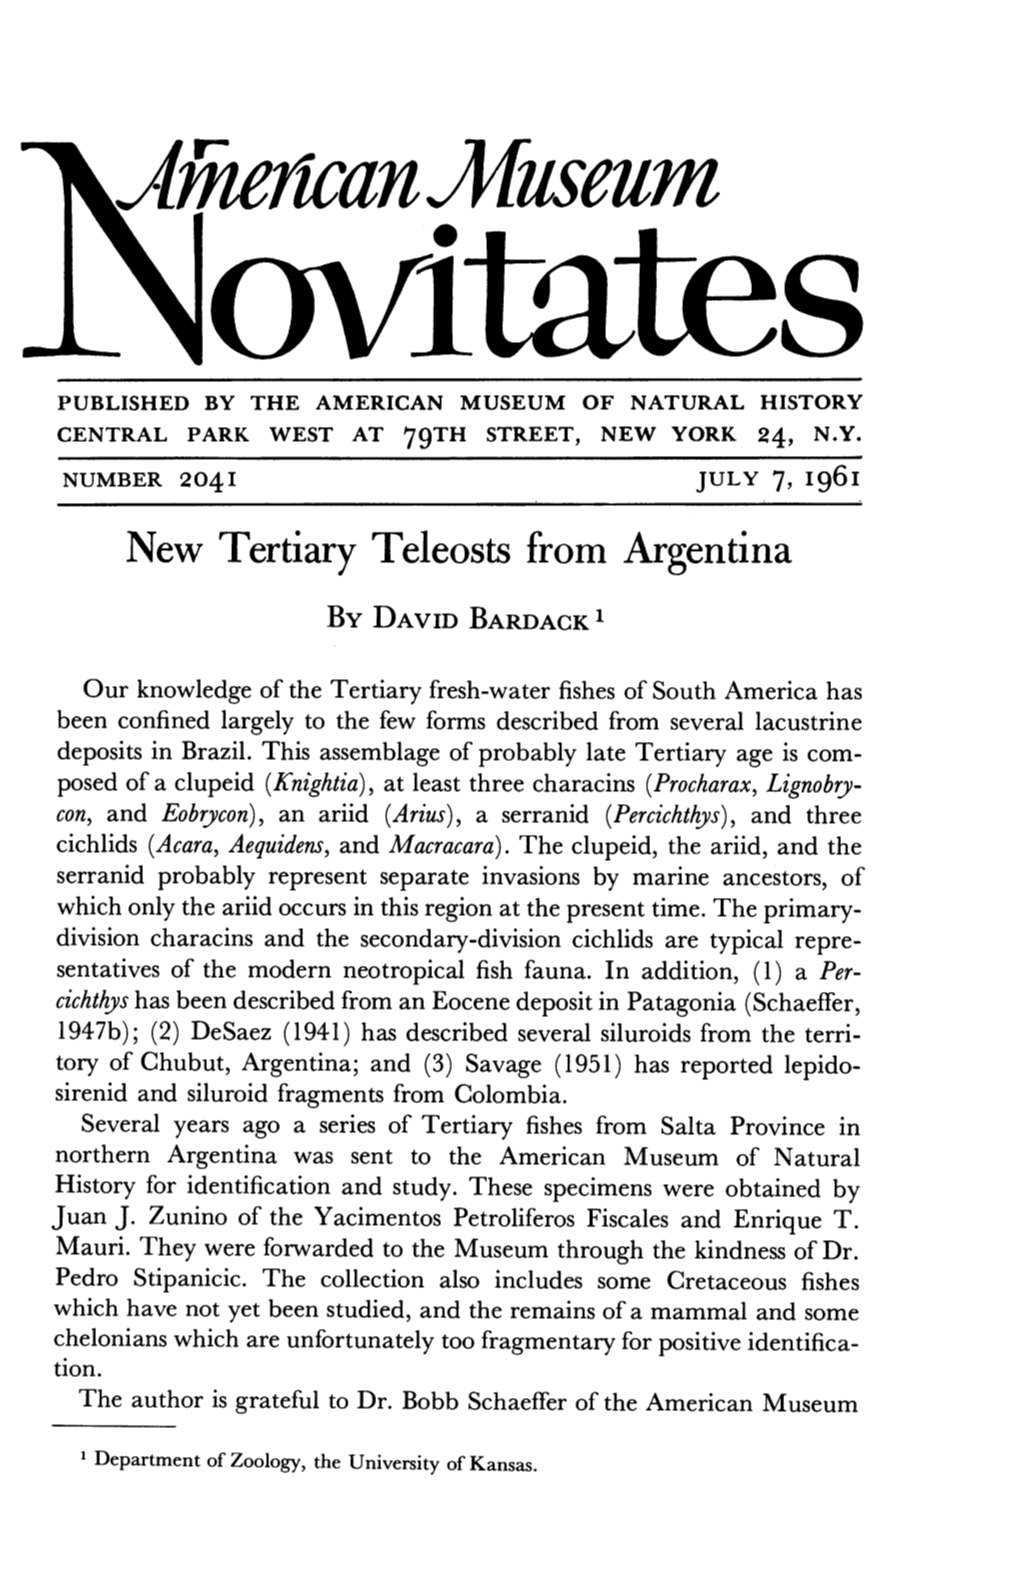 New Tertiary Teleosts from Argentina by DAVID BARDACK'